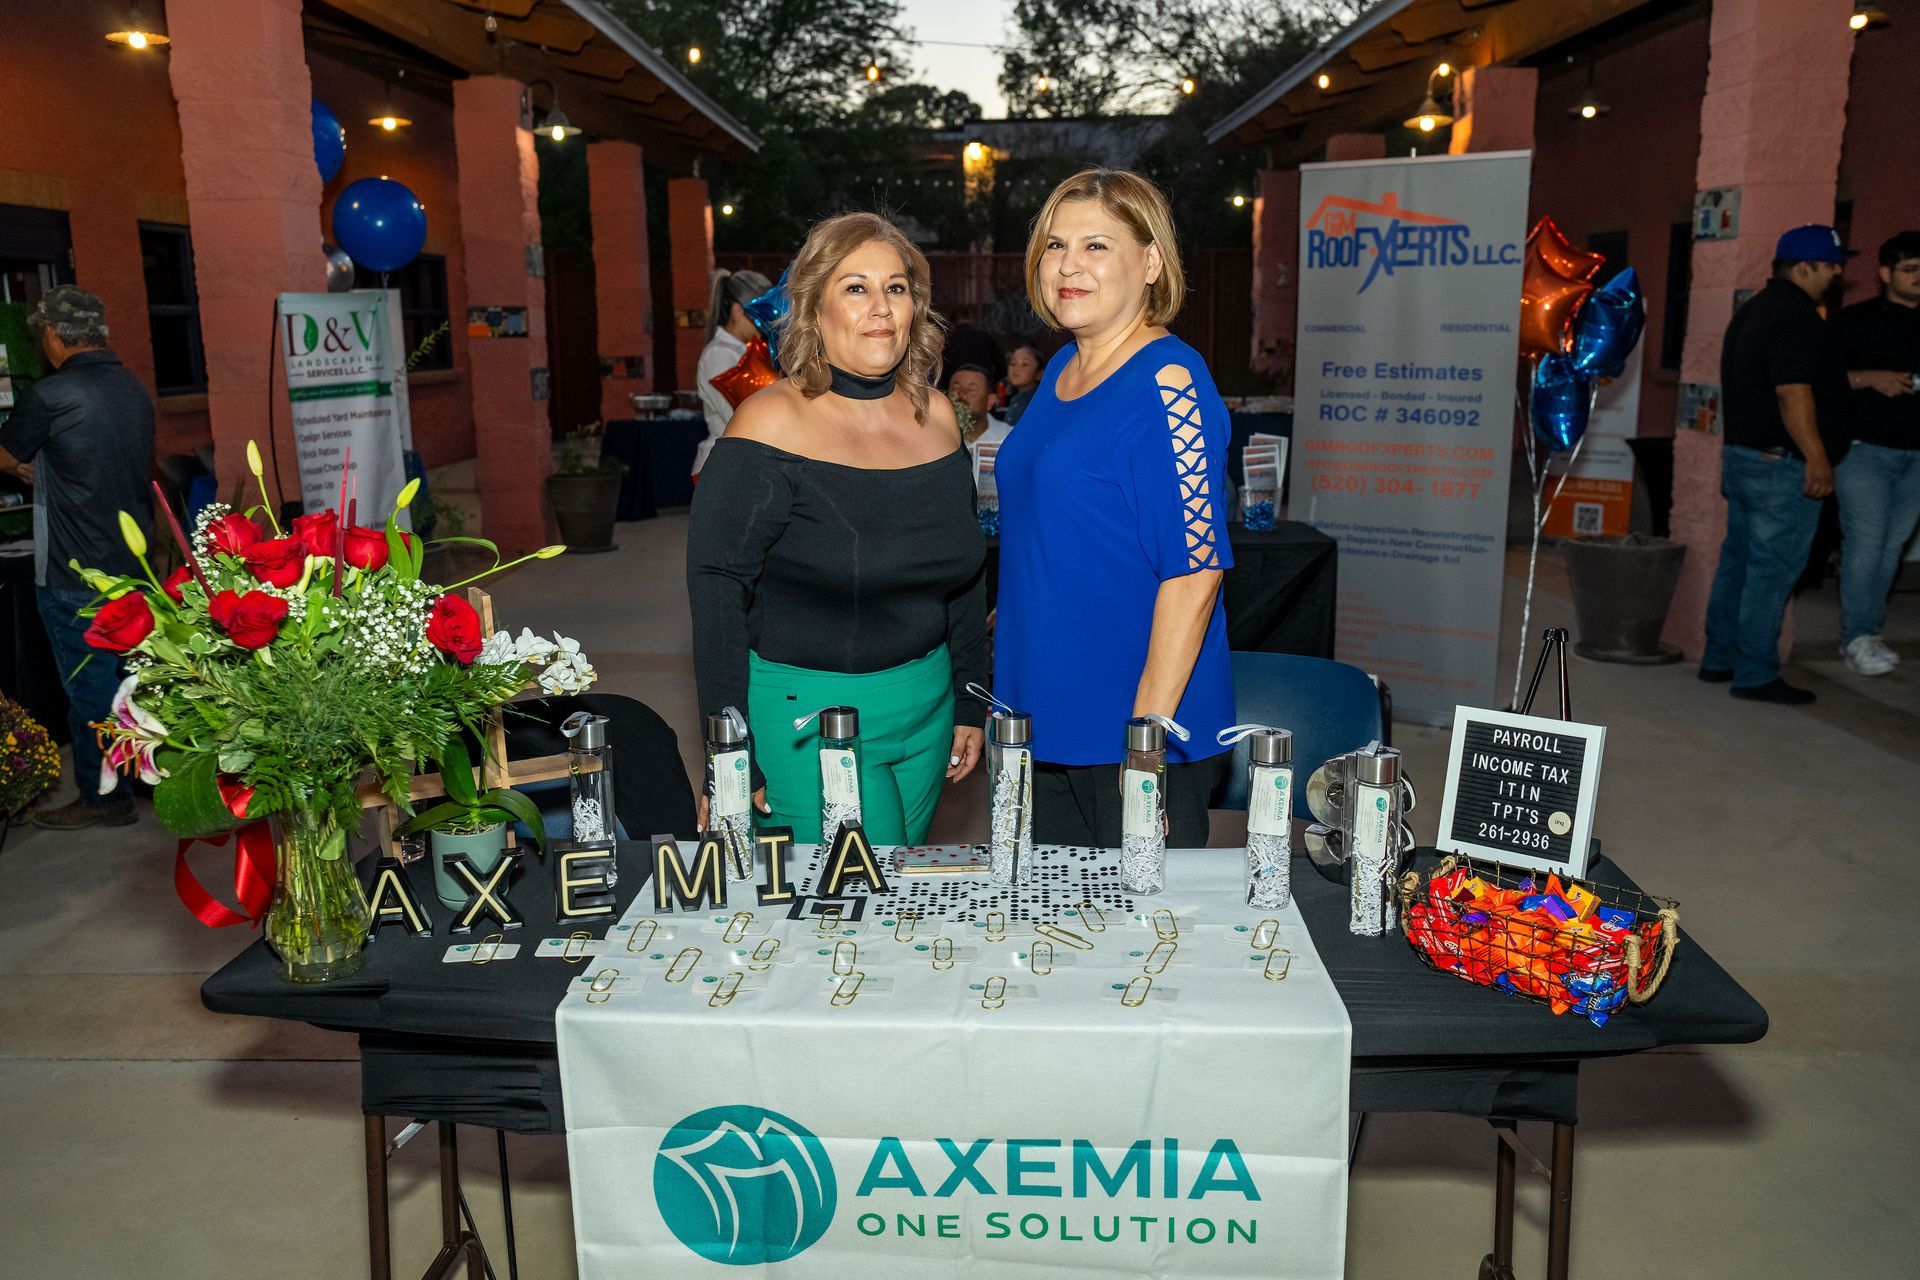 Two women are standing in front of a table that says axemia one solution.